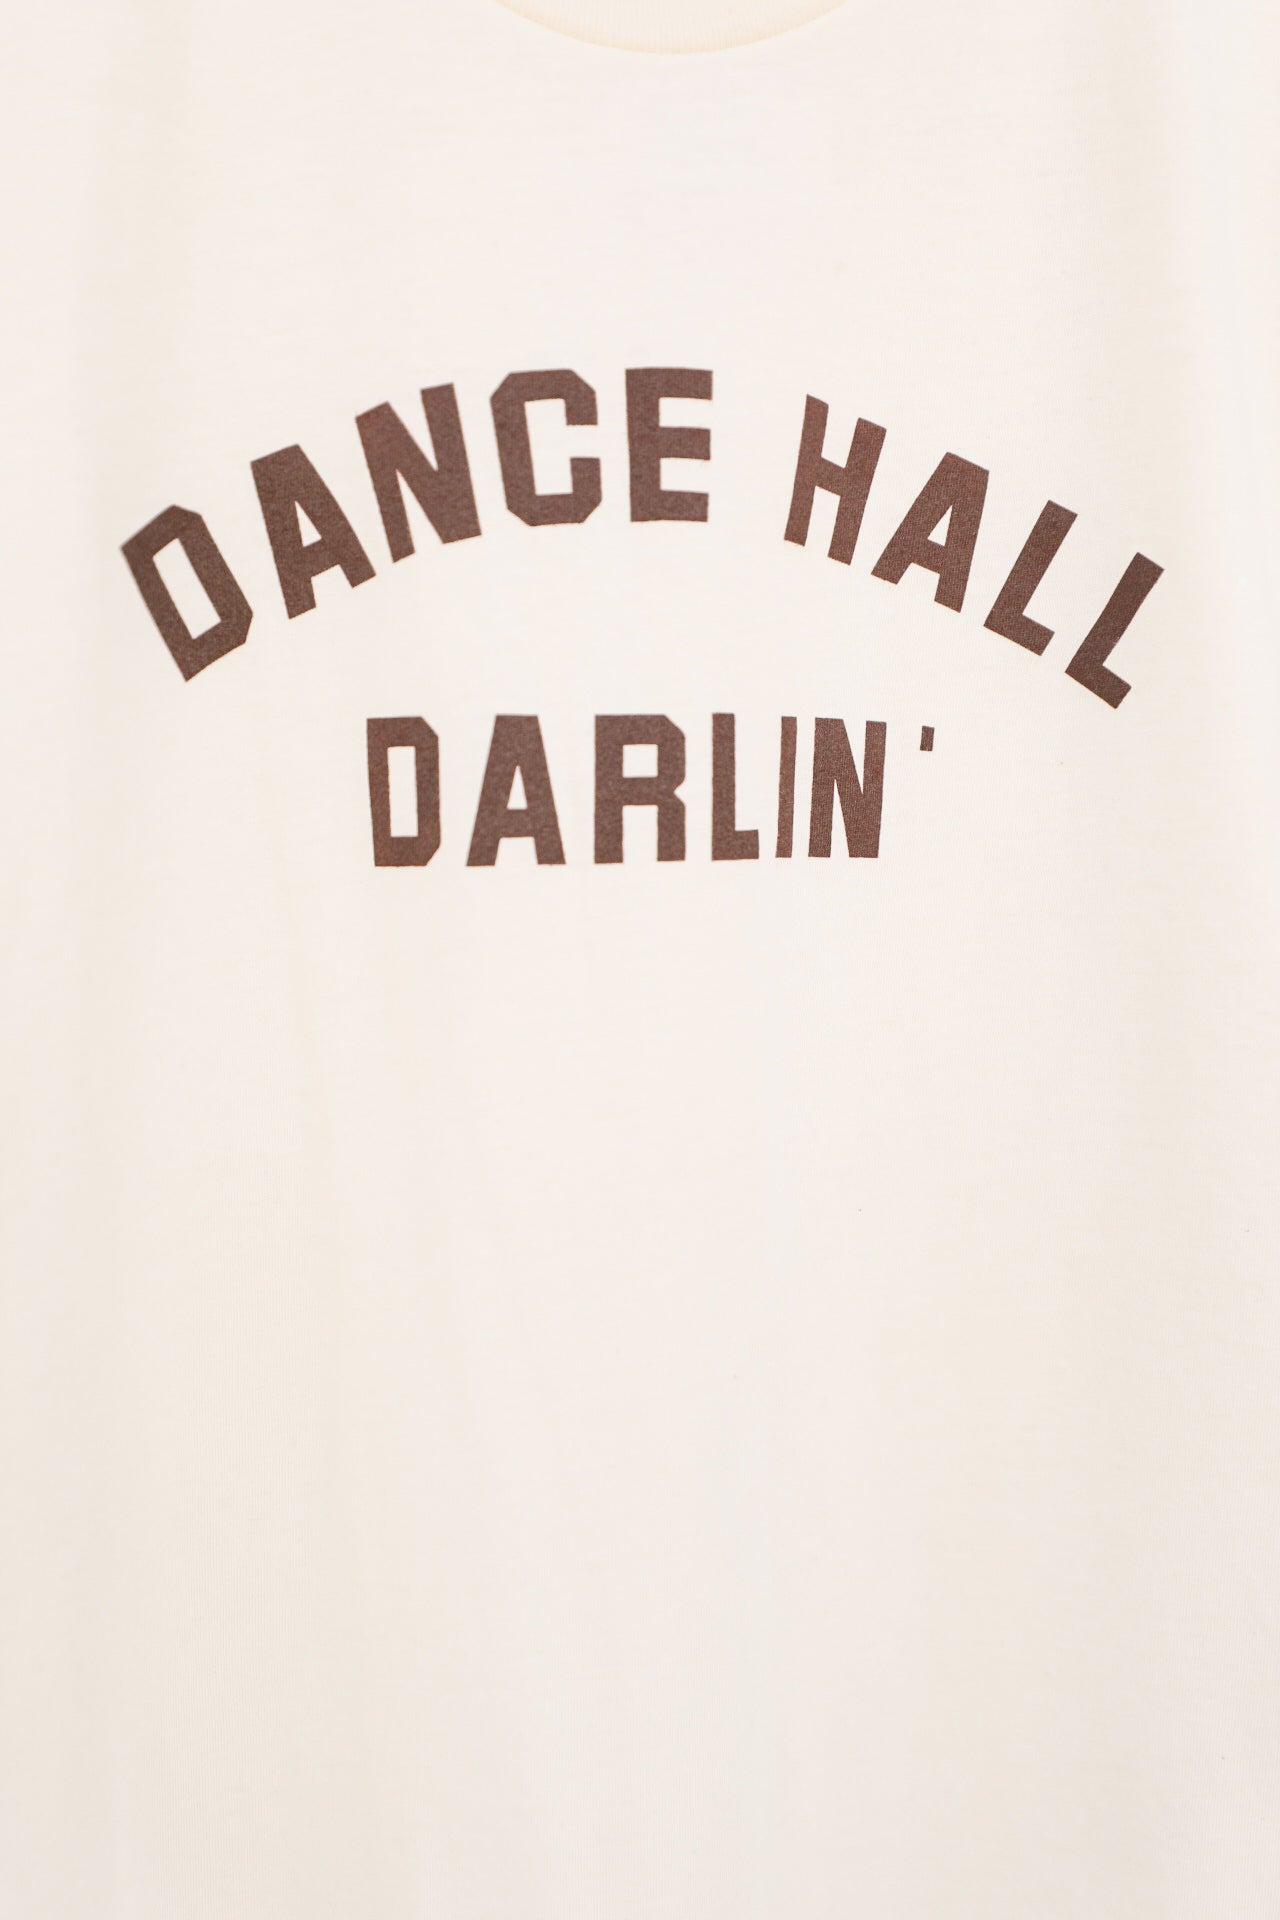 Dance Hall Darlin' Tee-Graphic Tee-Crooked Horn Company, Online Women's Fashion Boutique in San Tan Valley, Arizona 85140